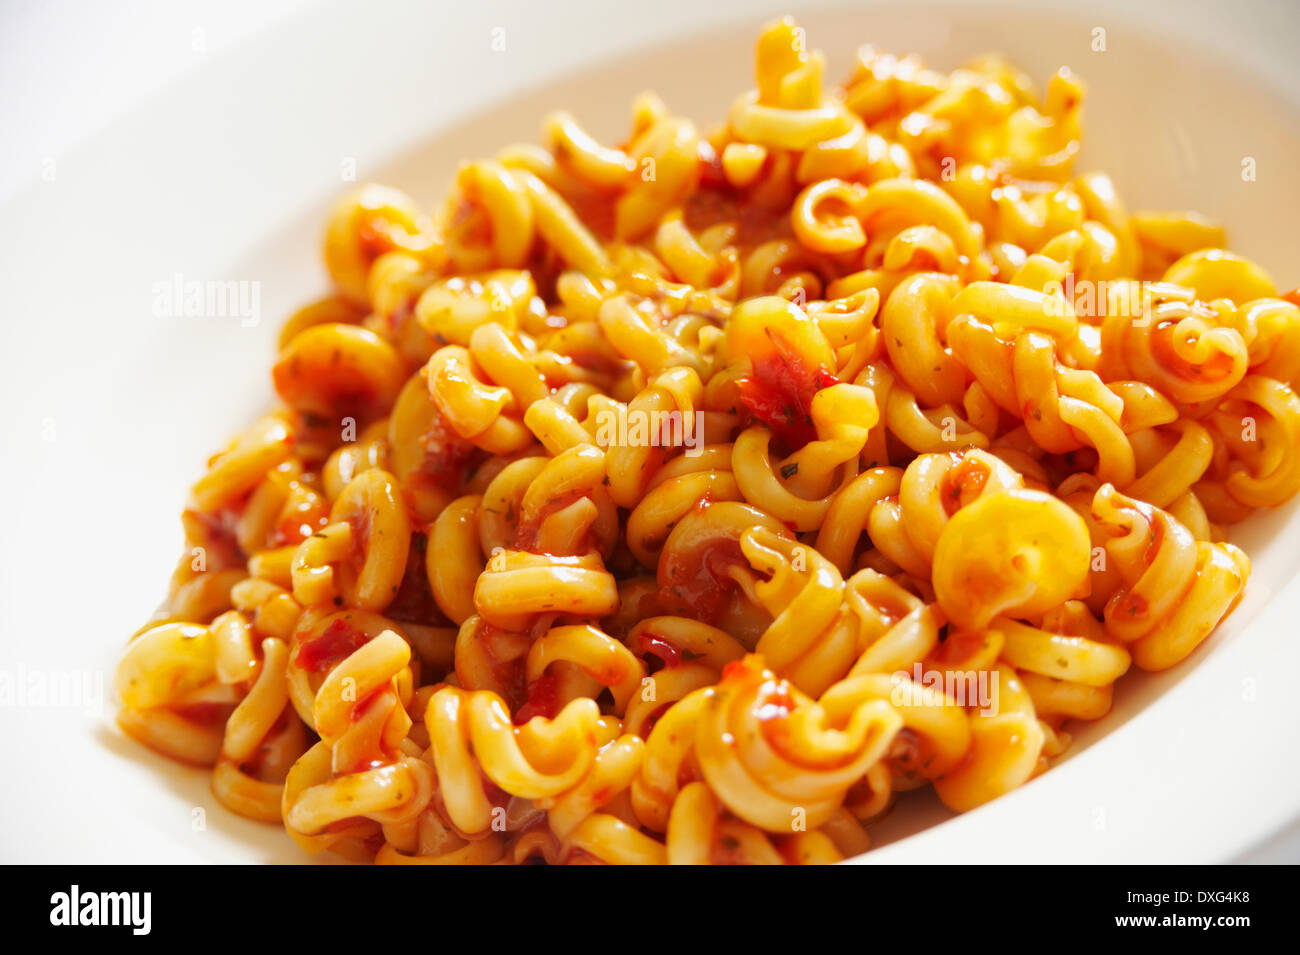 Plate Of Pasta Spirals With Tomato Sauce Stock Photo